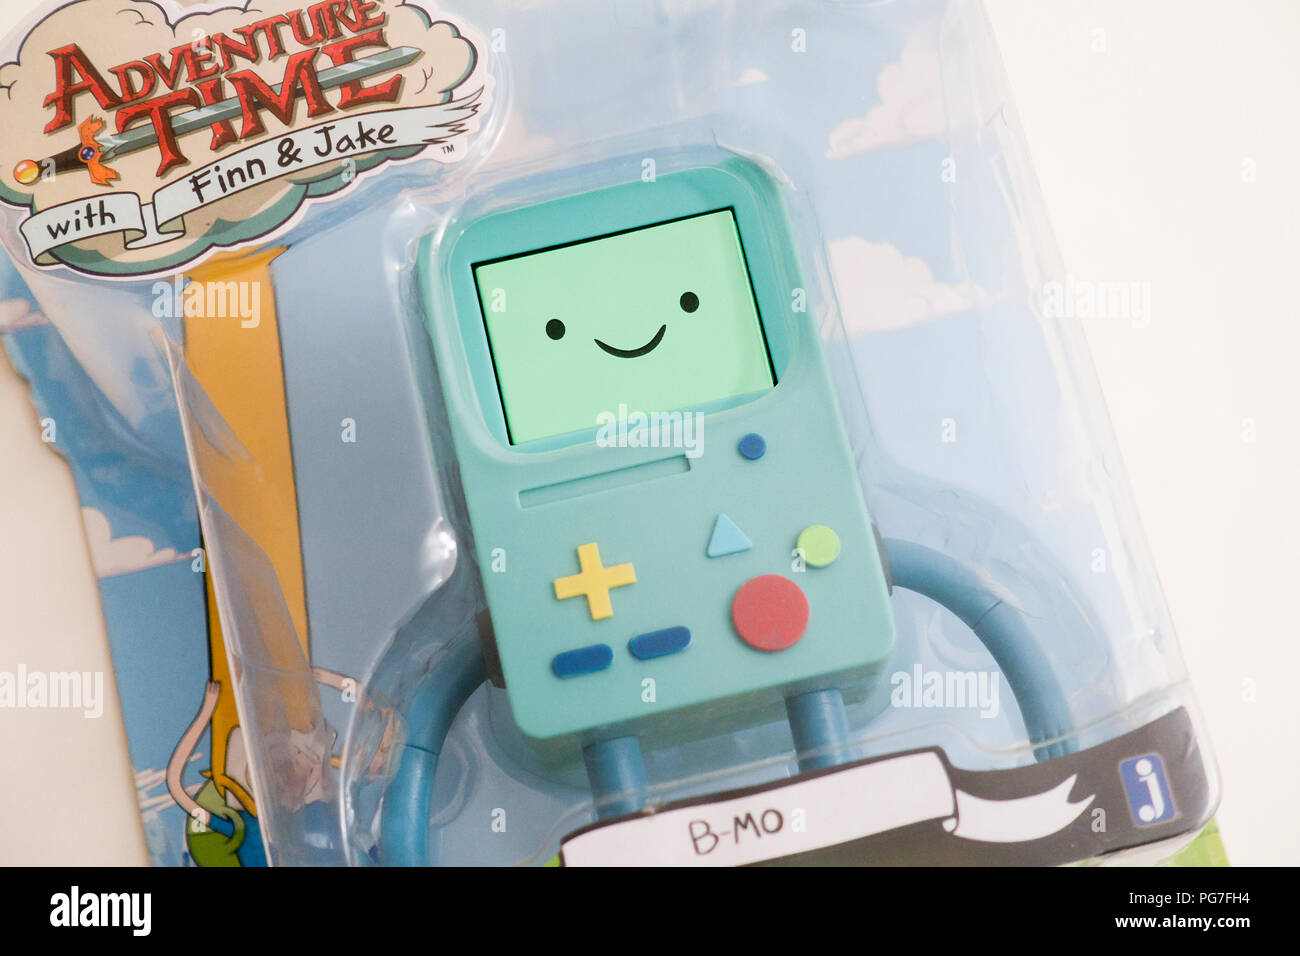 Adventure Time BMO (Beemo) toy in package - USA Stock Photo